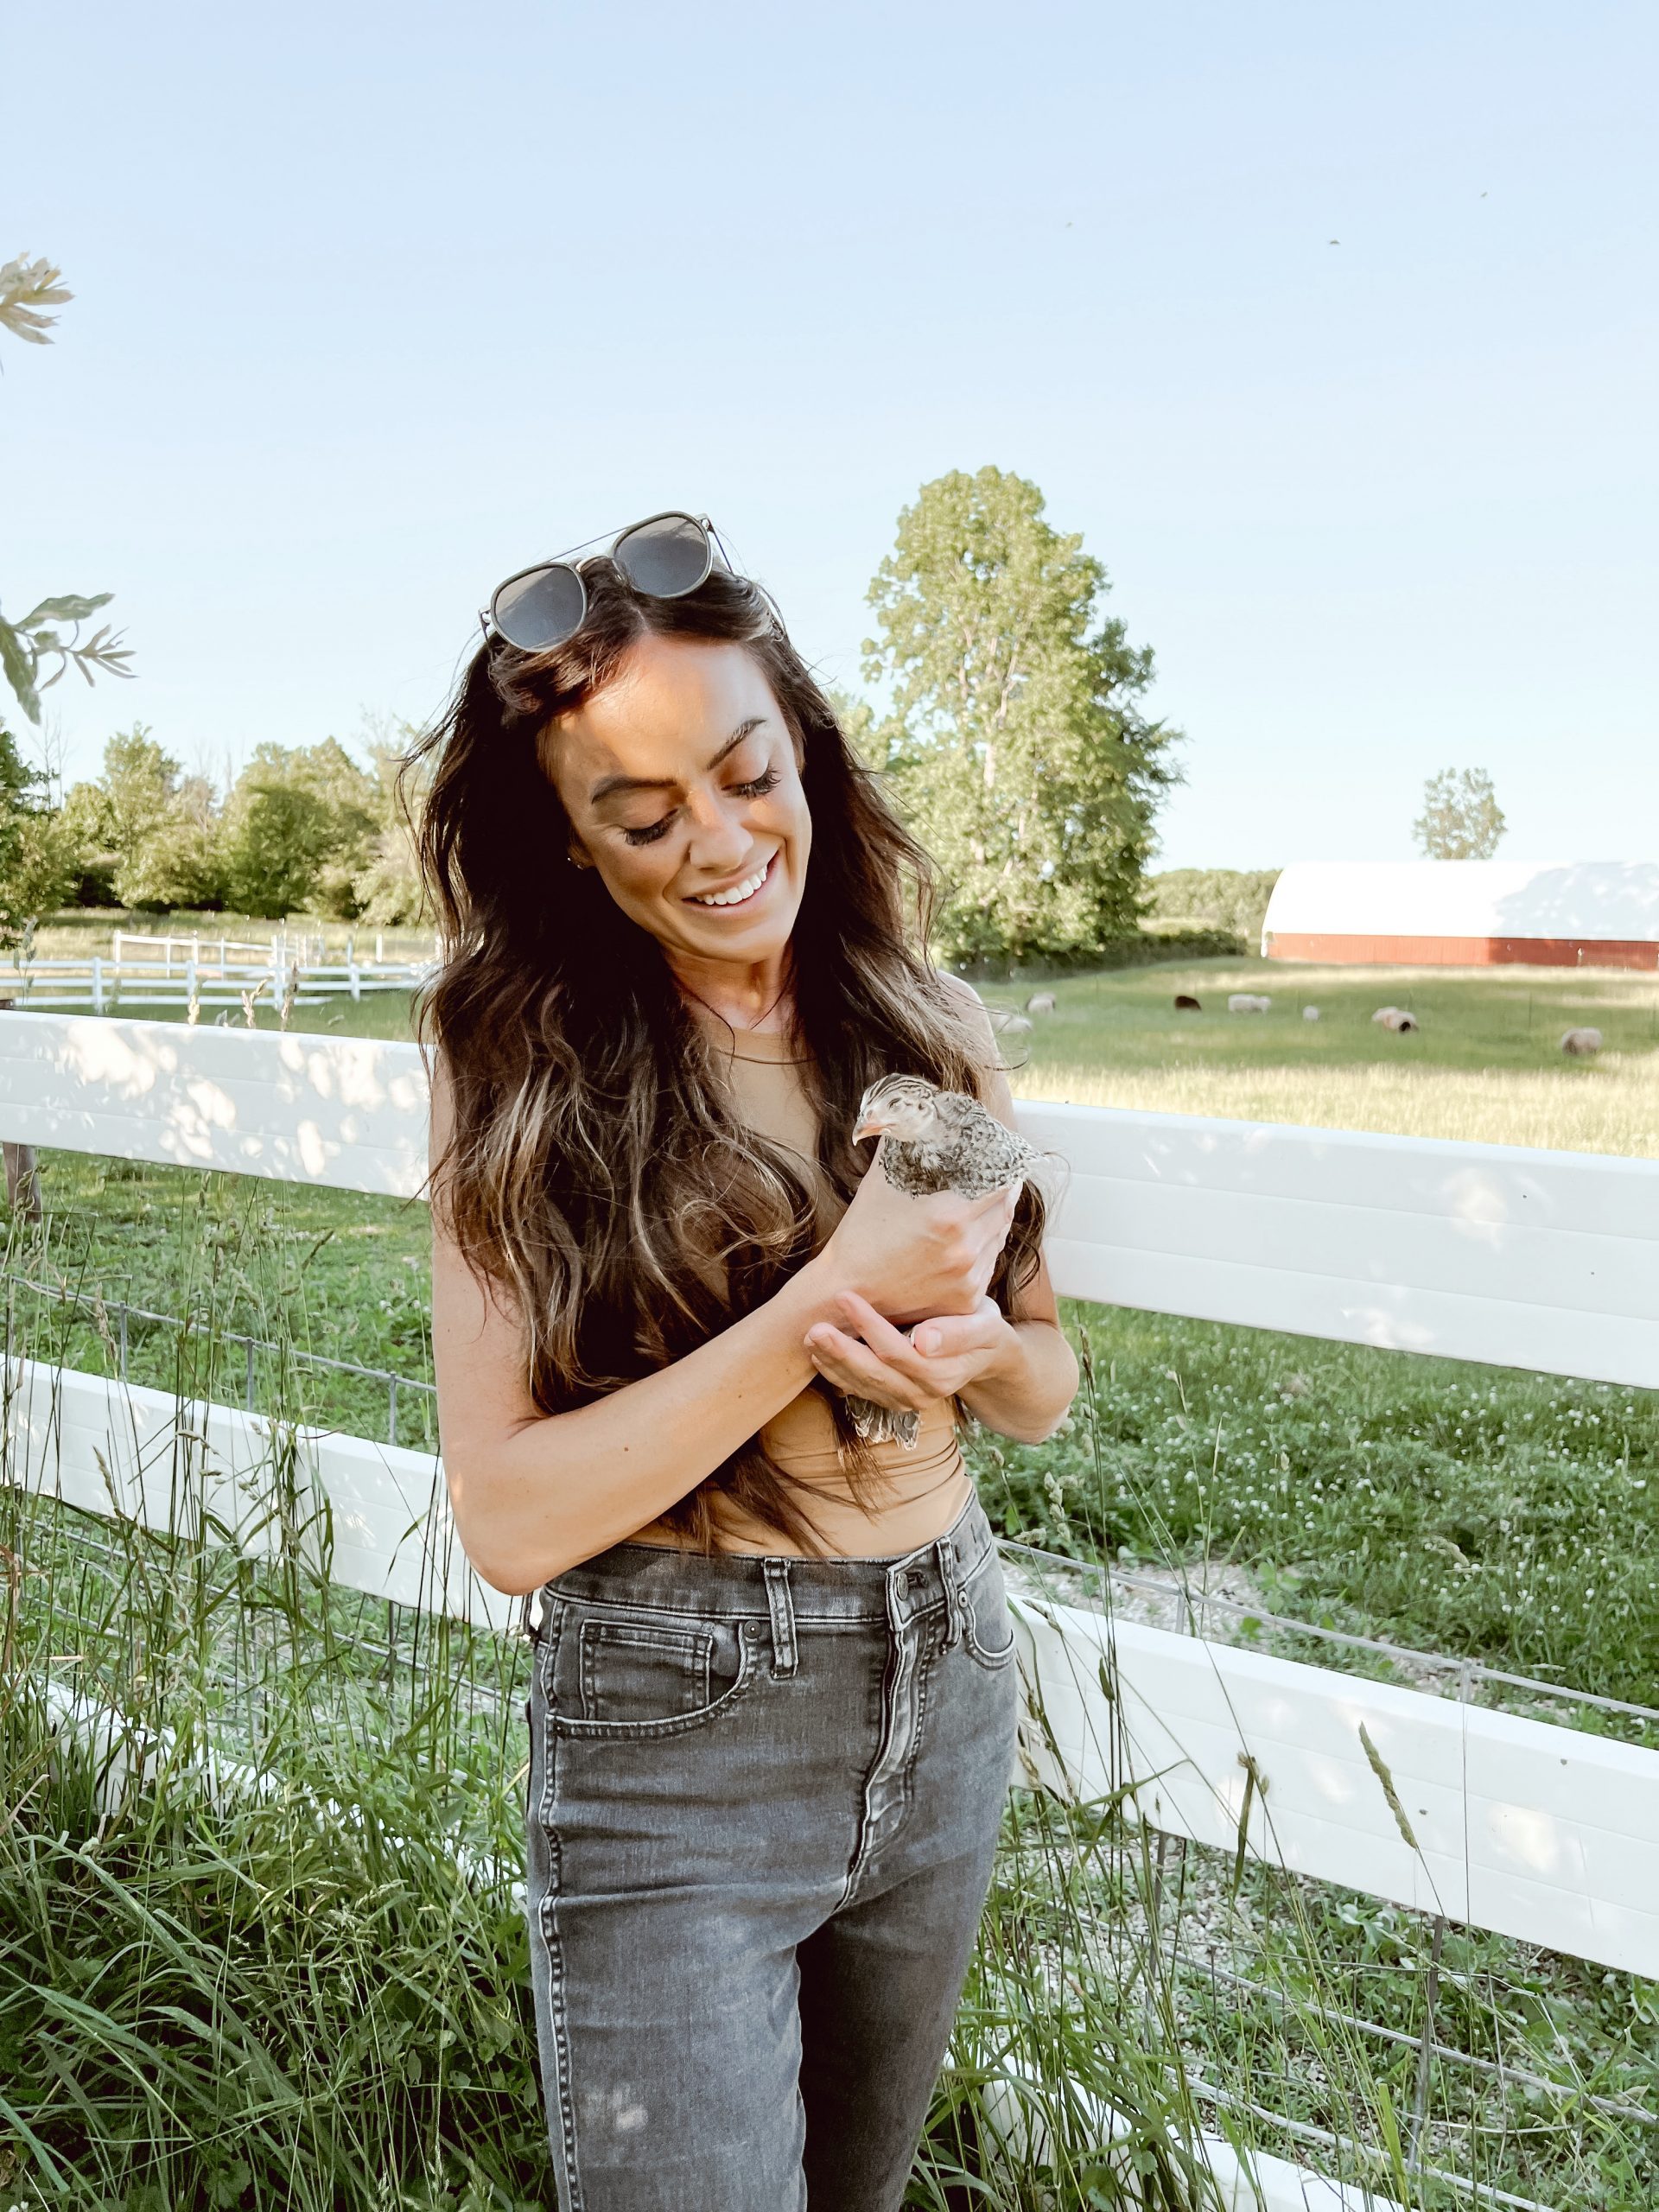 Favorite Things Friday: Chickens, Cozy Bedrooms, & An AC Unit